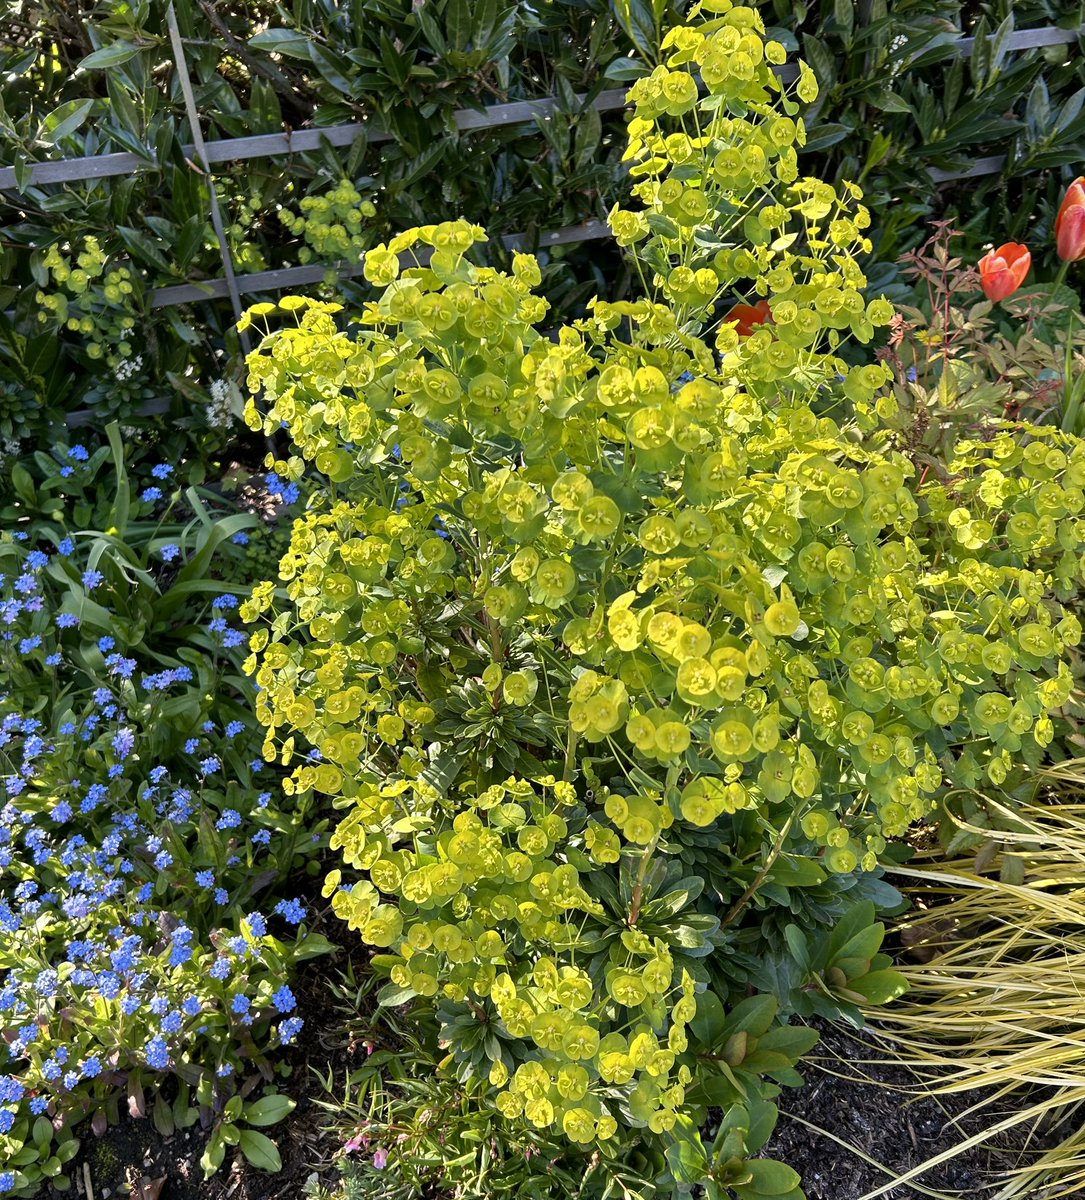 #Euphorbia and #ForgetMeNot make for a beautiful combination in this shady spot. 
#Gardening #PollinatorGarden